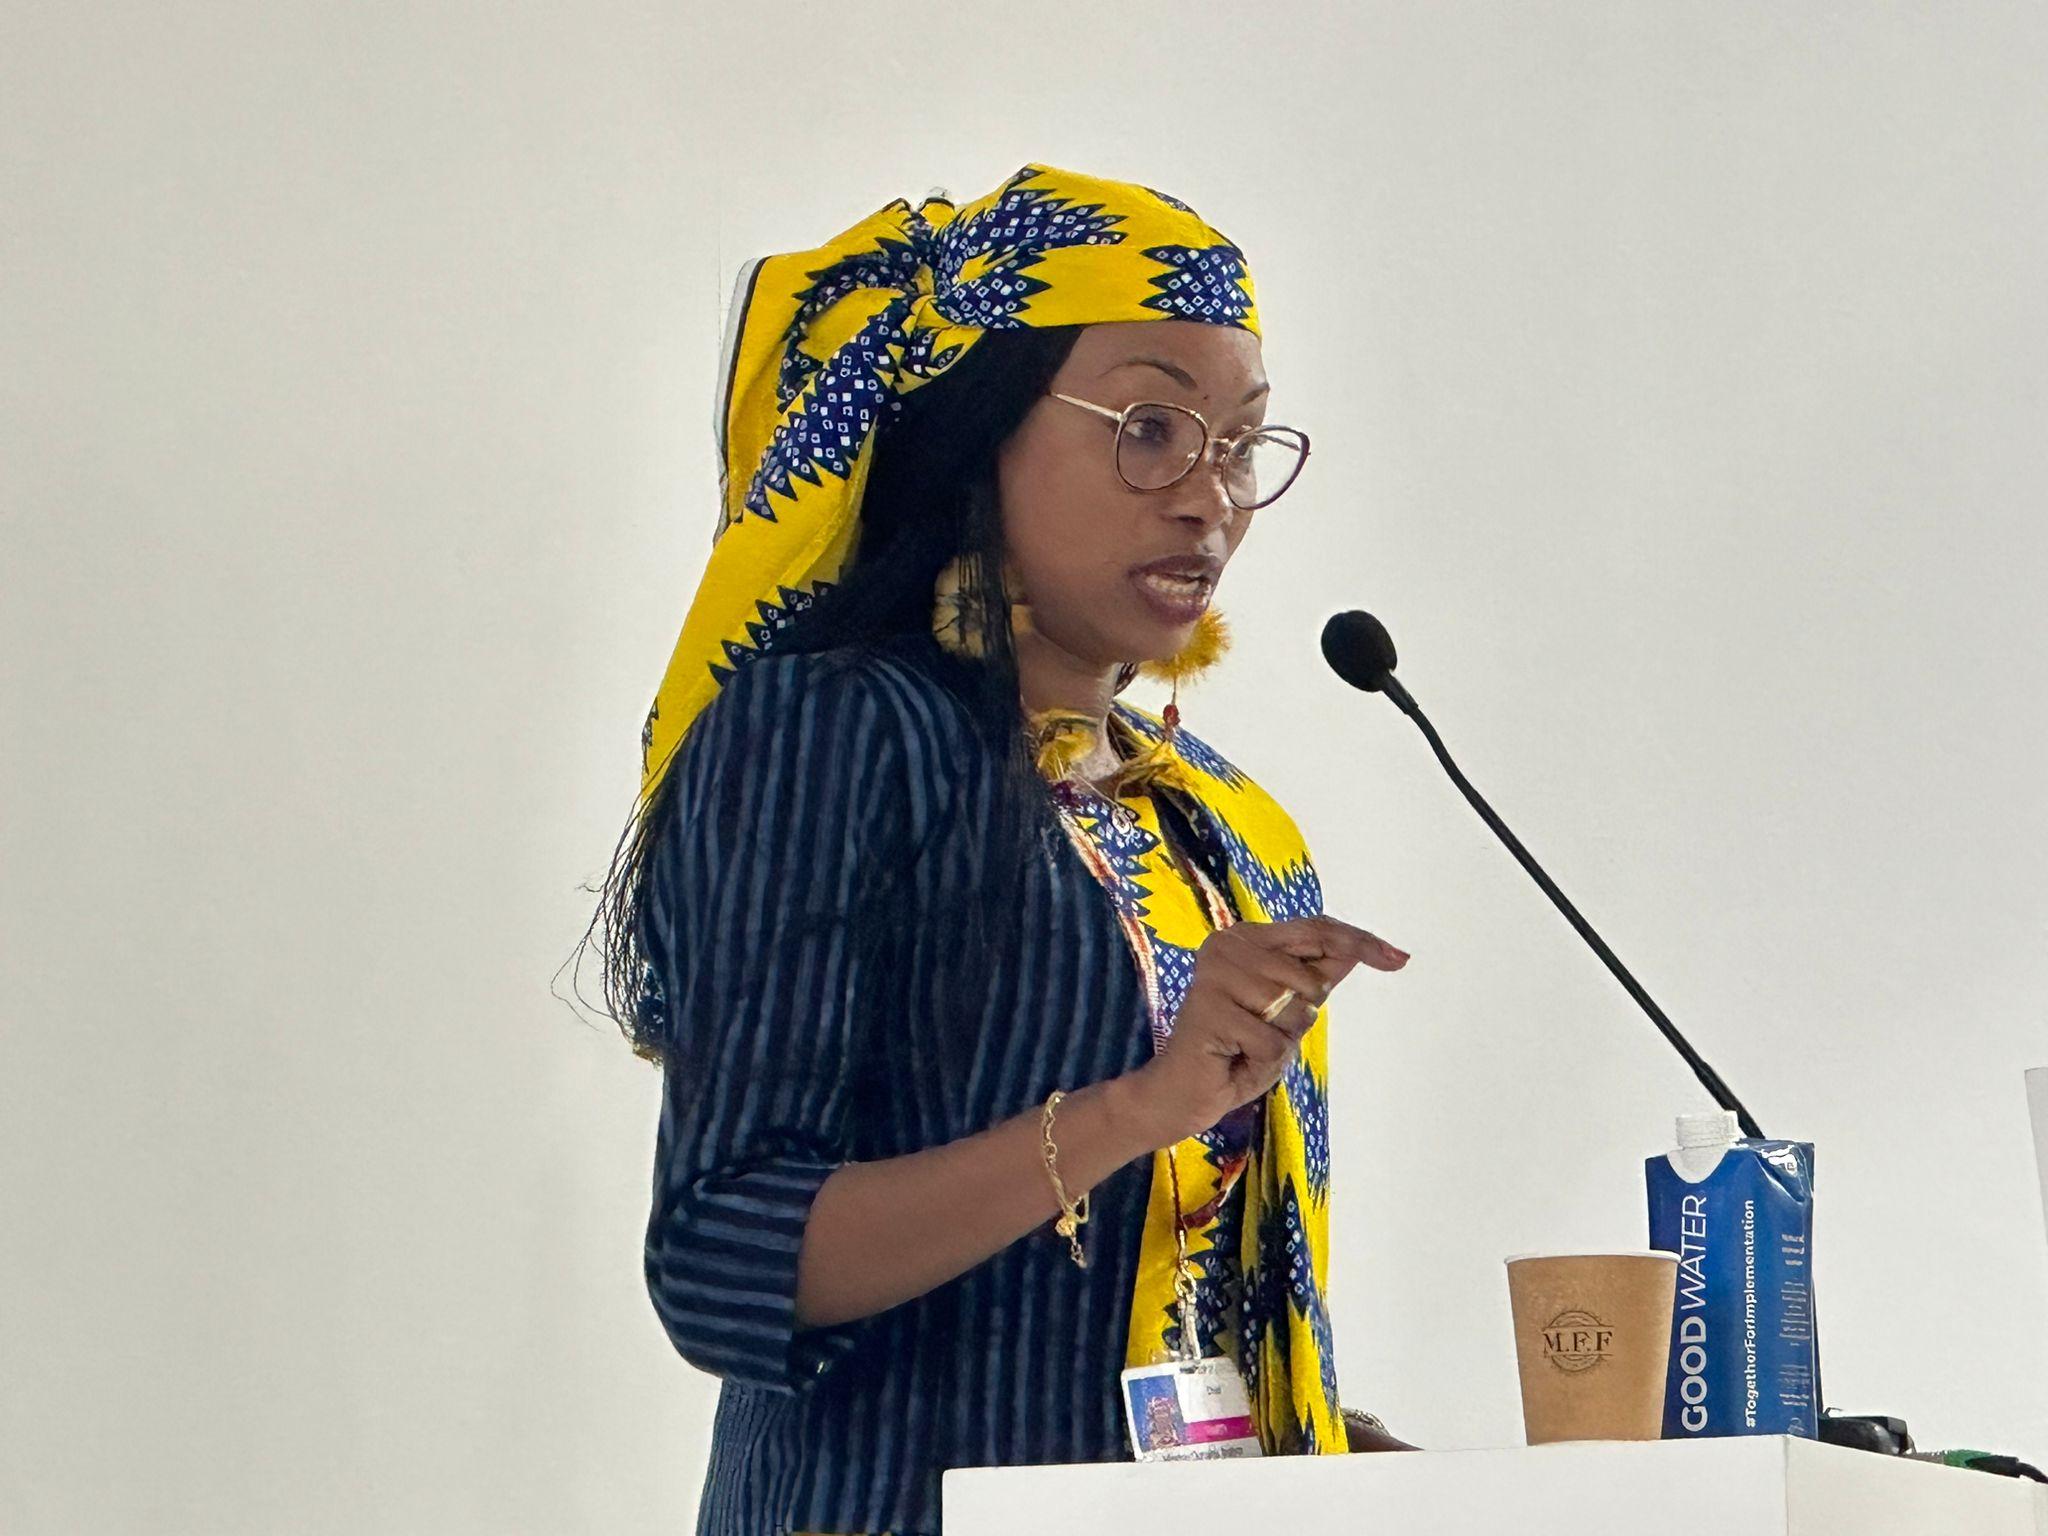 Hindou Oumarou Ibrahim, environmental activist and geographer from Chad